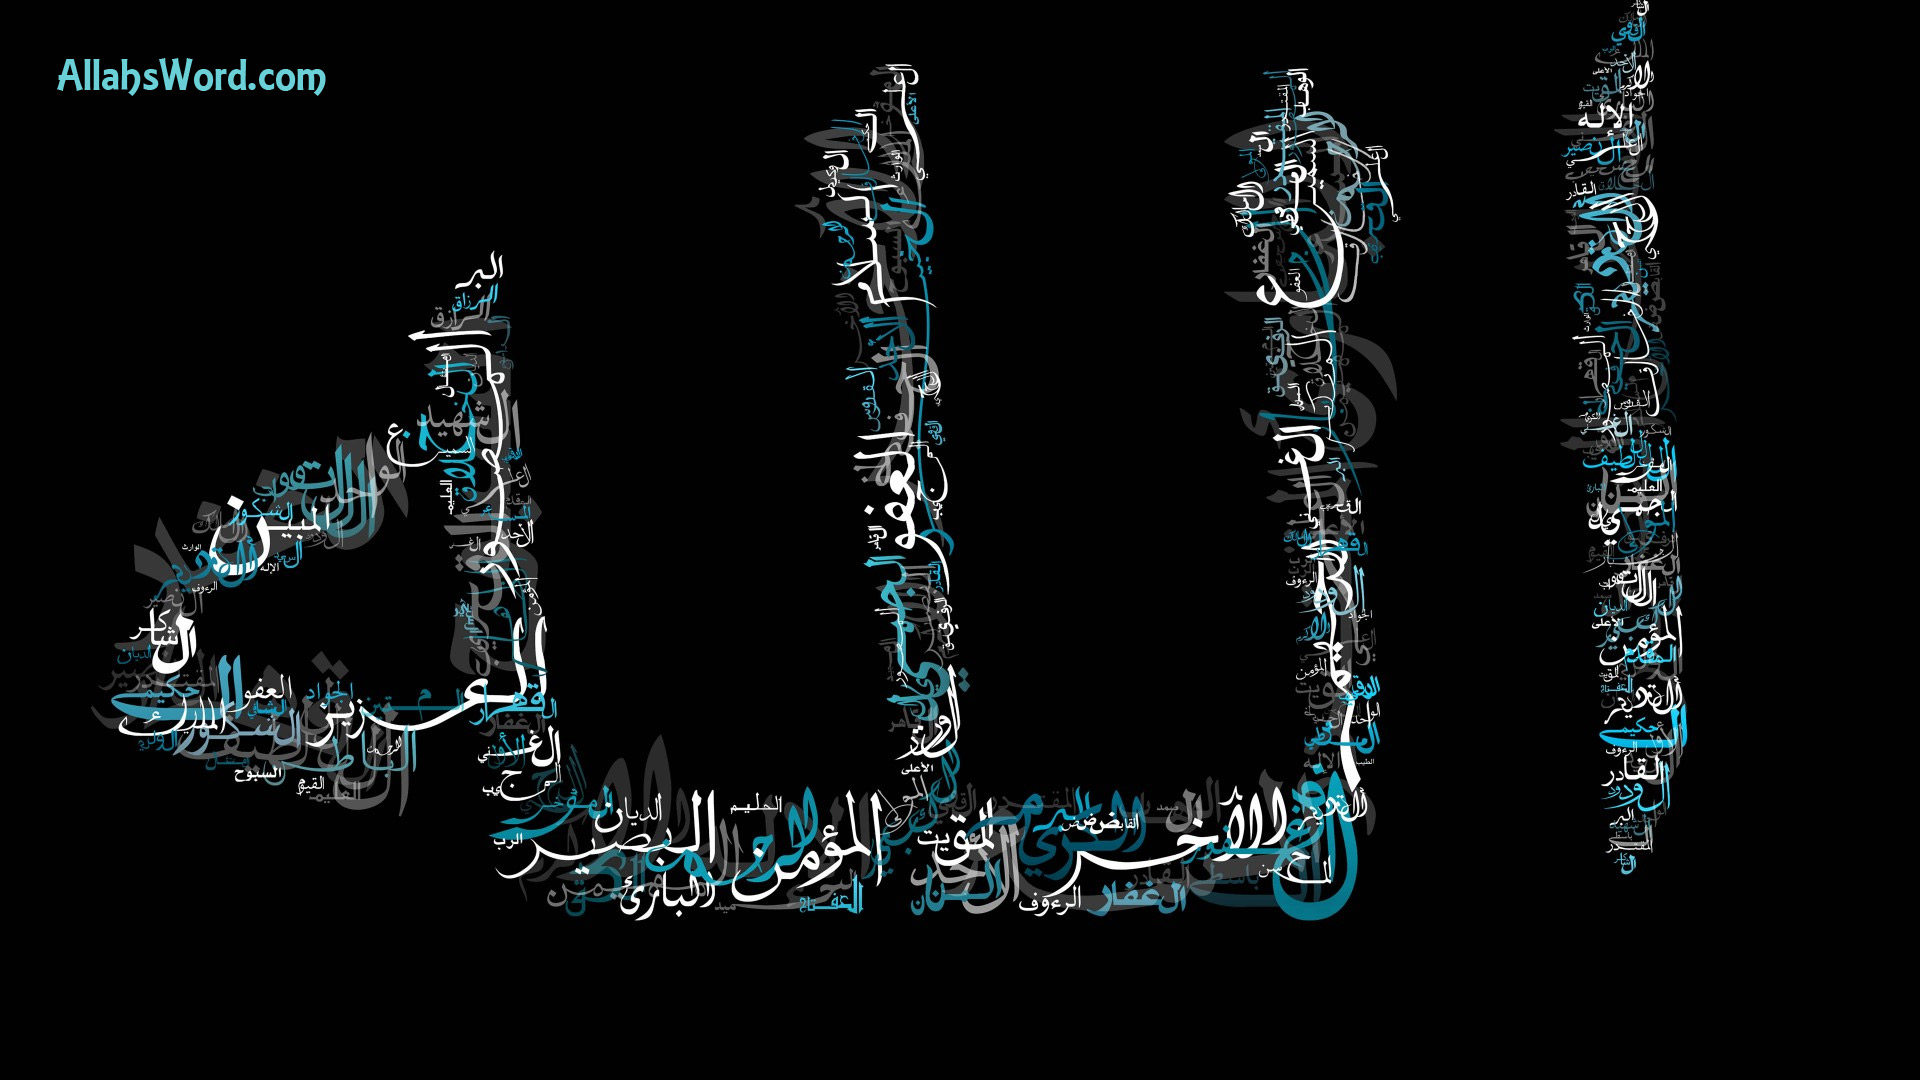 99 Names of Allah Typography